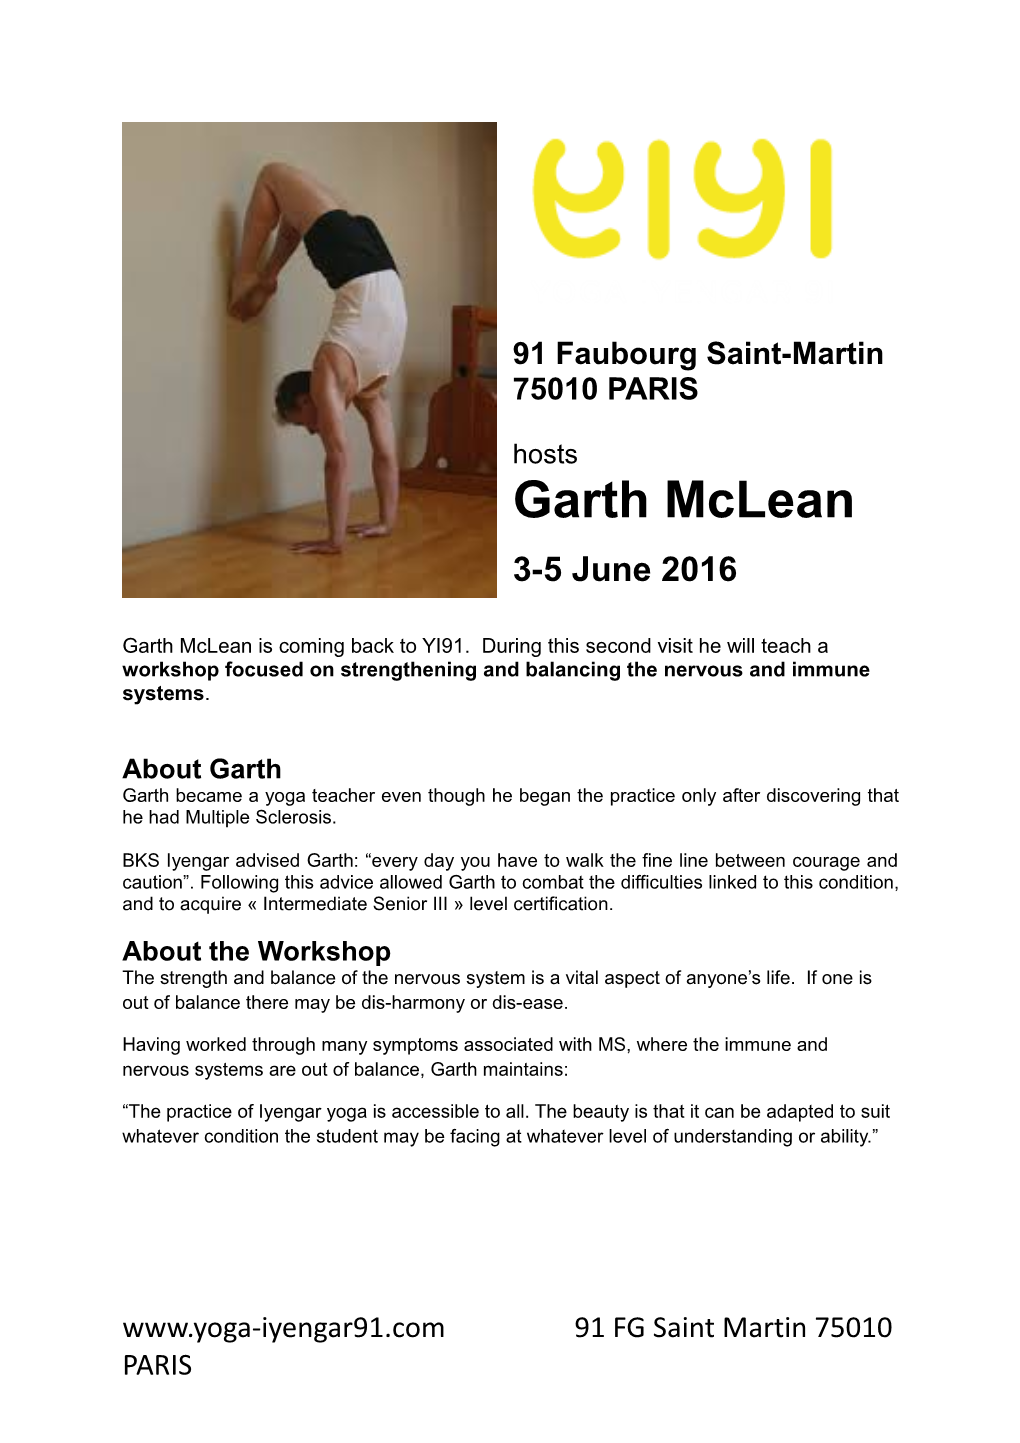 Garth Mclean Is Coming Back to YI91. During This Second Visit He Will Teach a Workshop